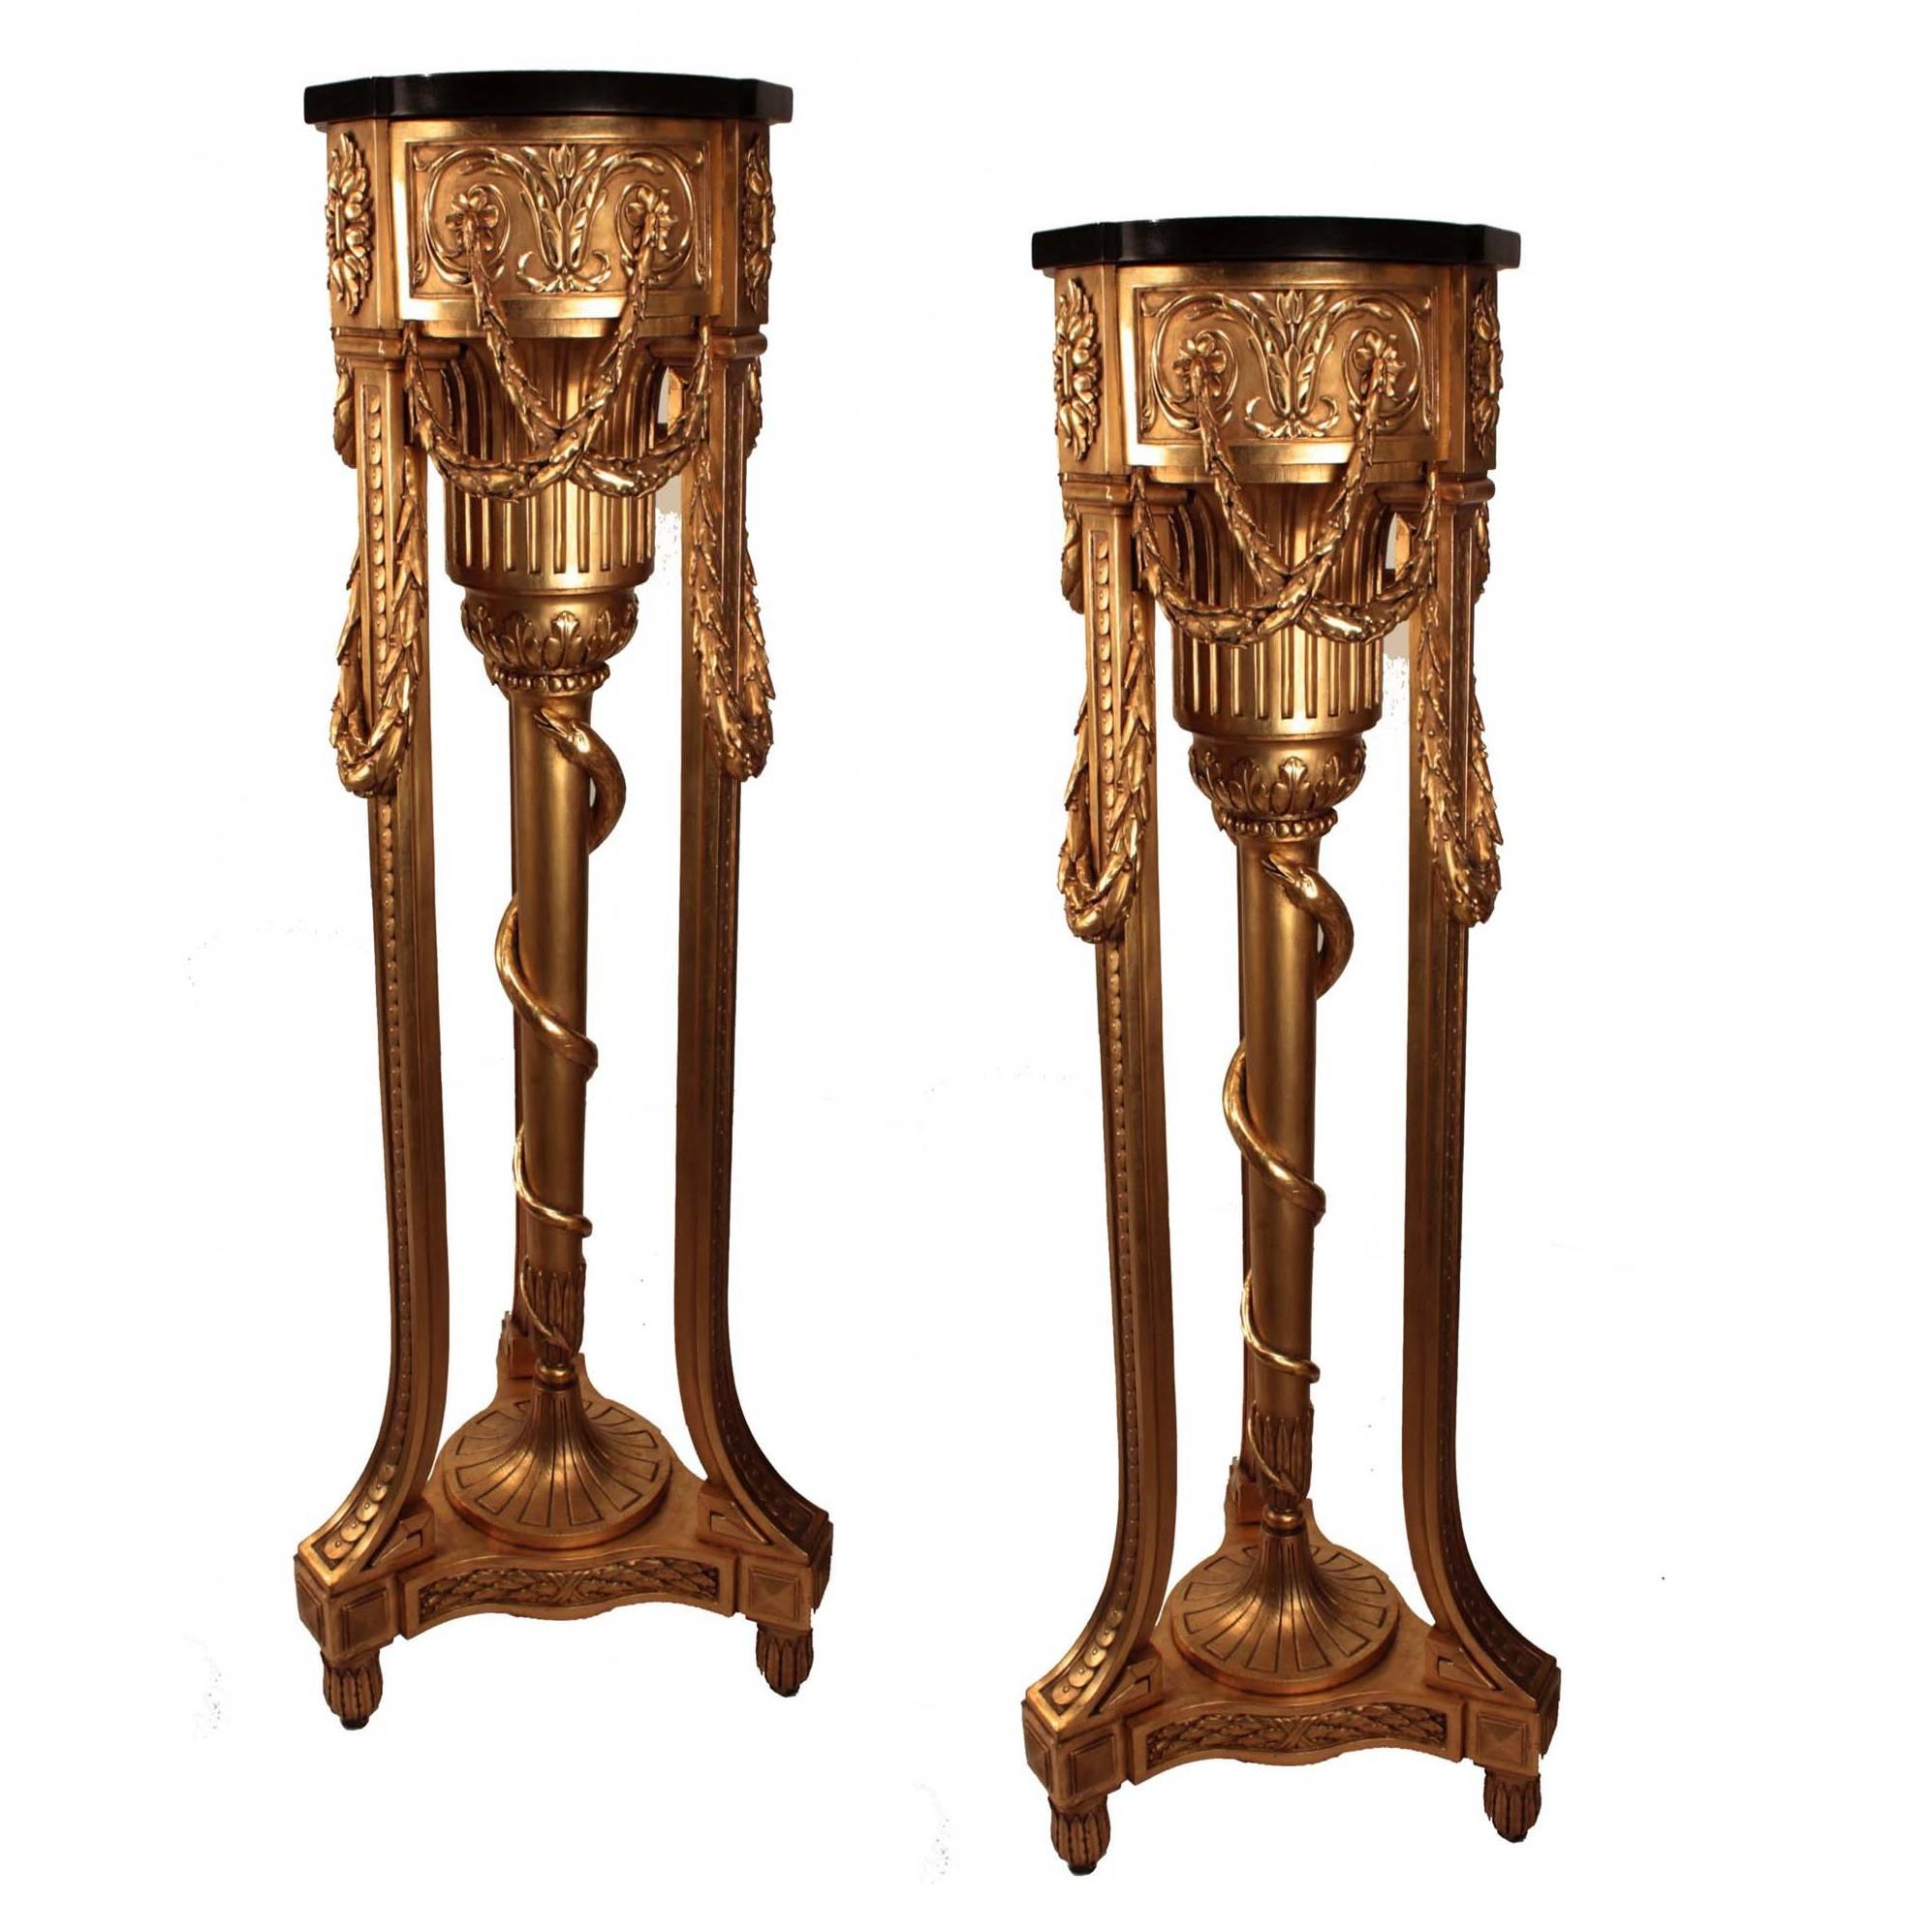 An Important Pair of   George III  Adam Style Giltwood Pedestals  For Sale